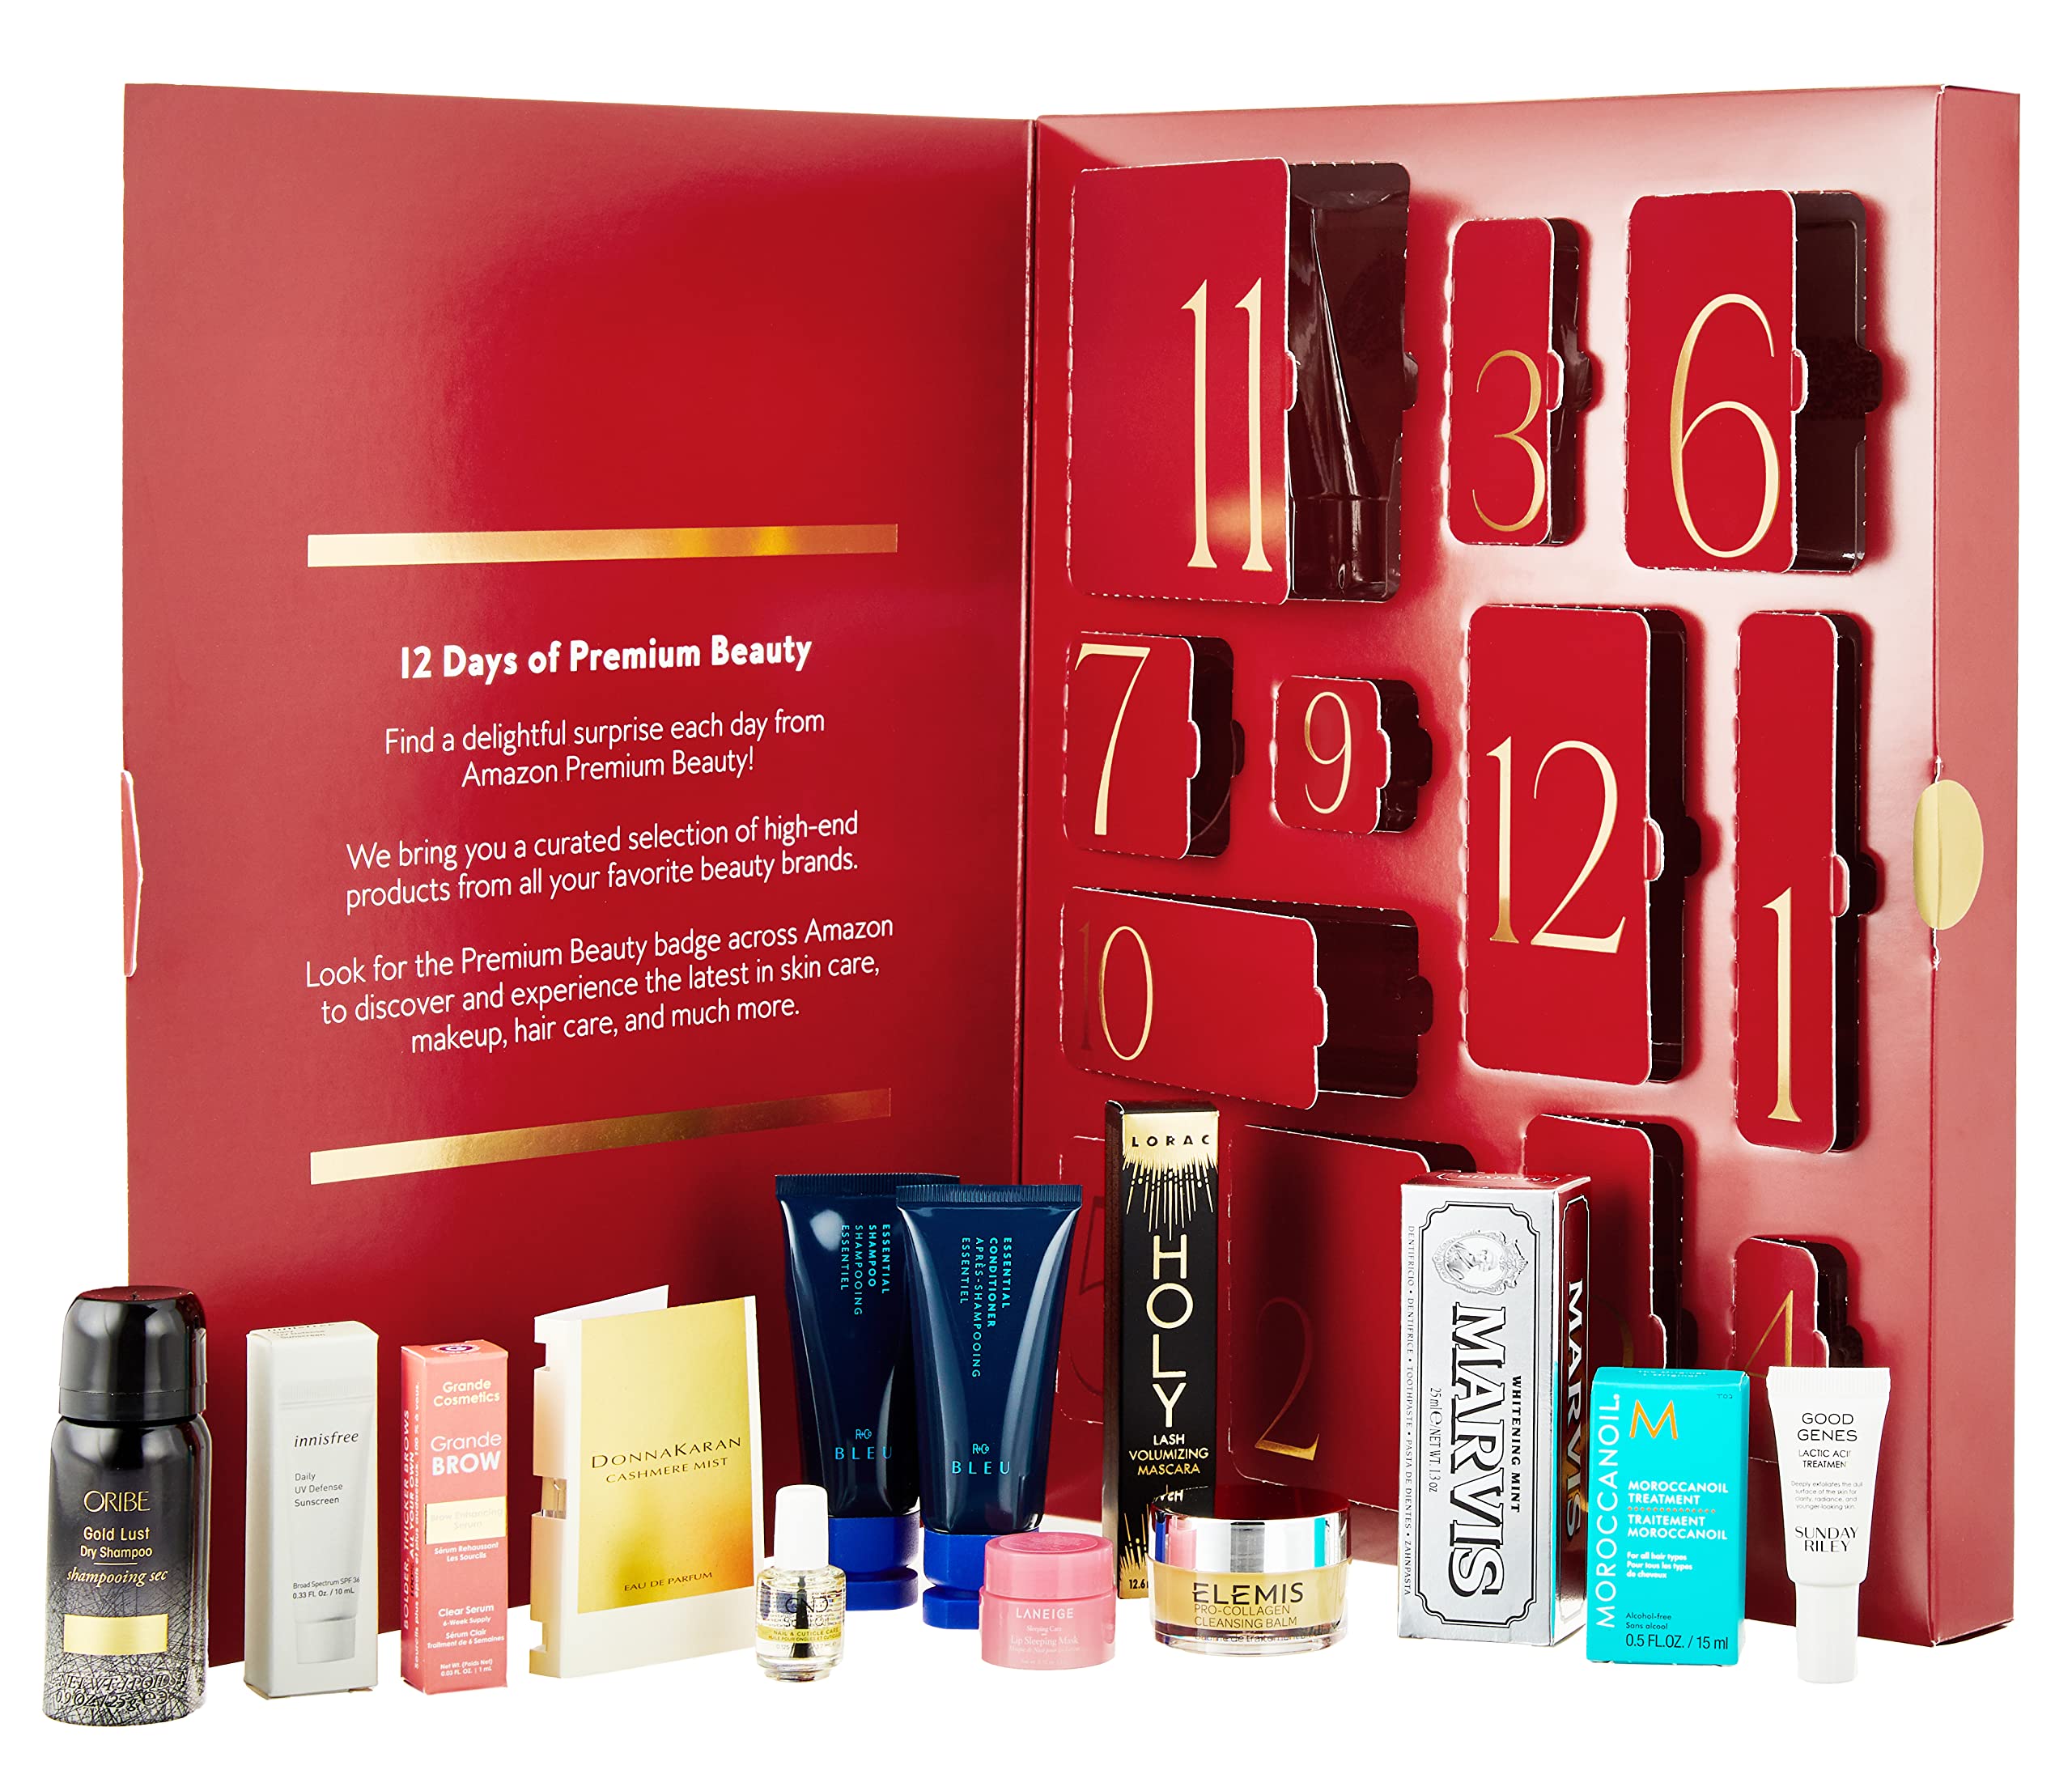 12-Piece "The Beauty Box: Best of Amazon Premium Beauty" Sampler Gift Box Set $19 + Free Shipping w/ Prime